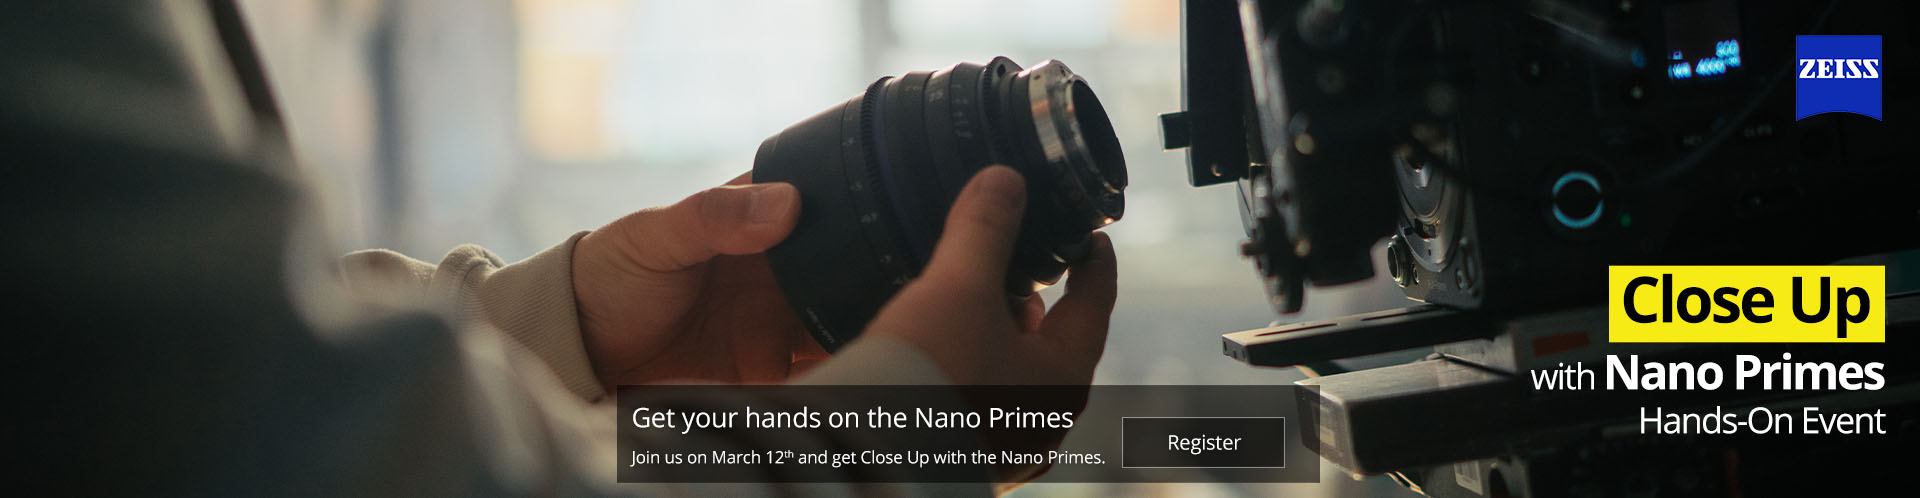 Zeiss Nano Primes Hands-On Event